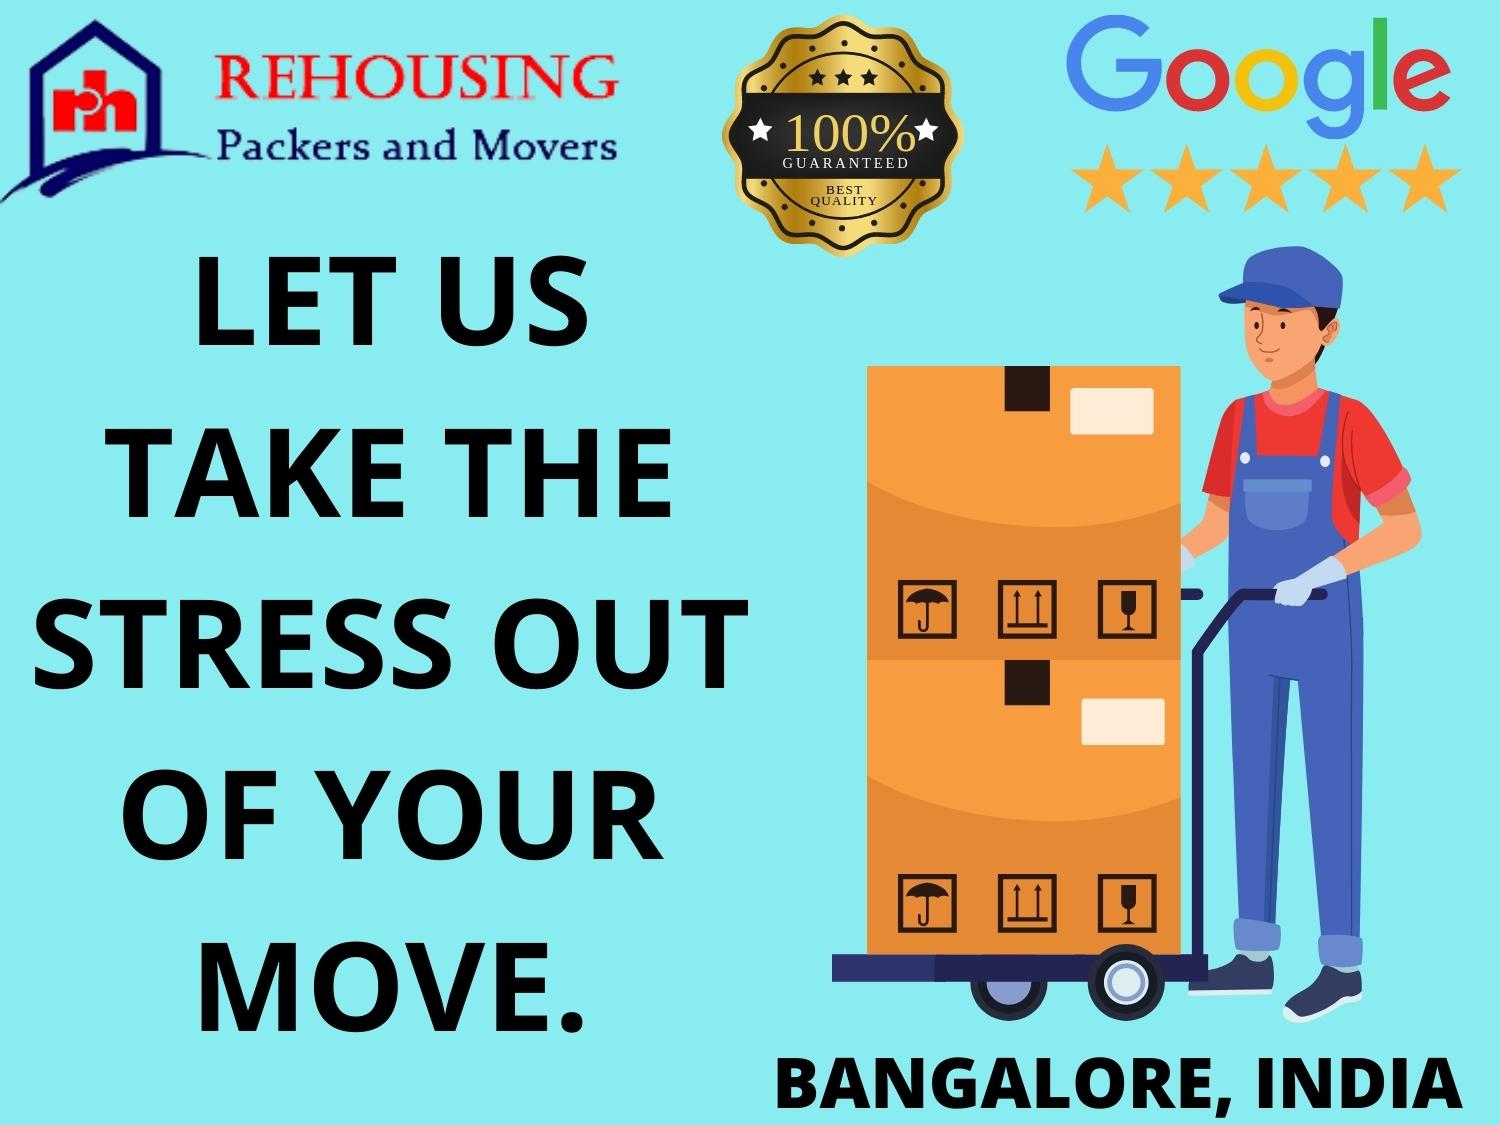 What are the benefits you get when you hire packers and movers from us?